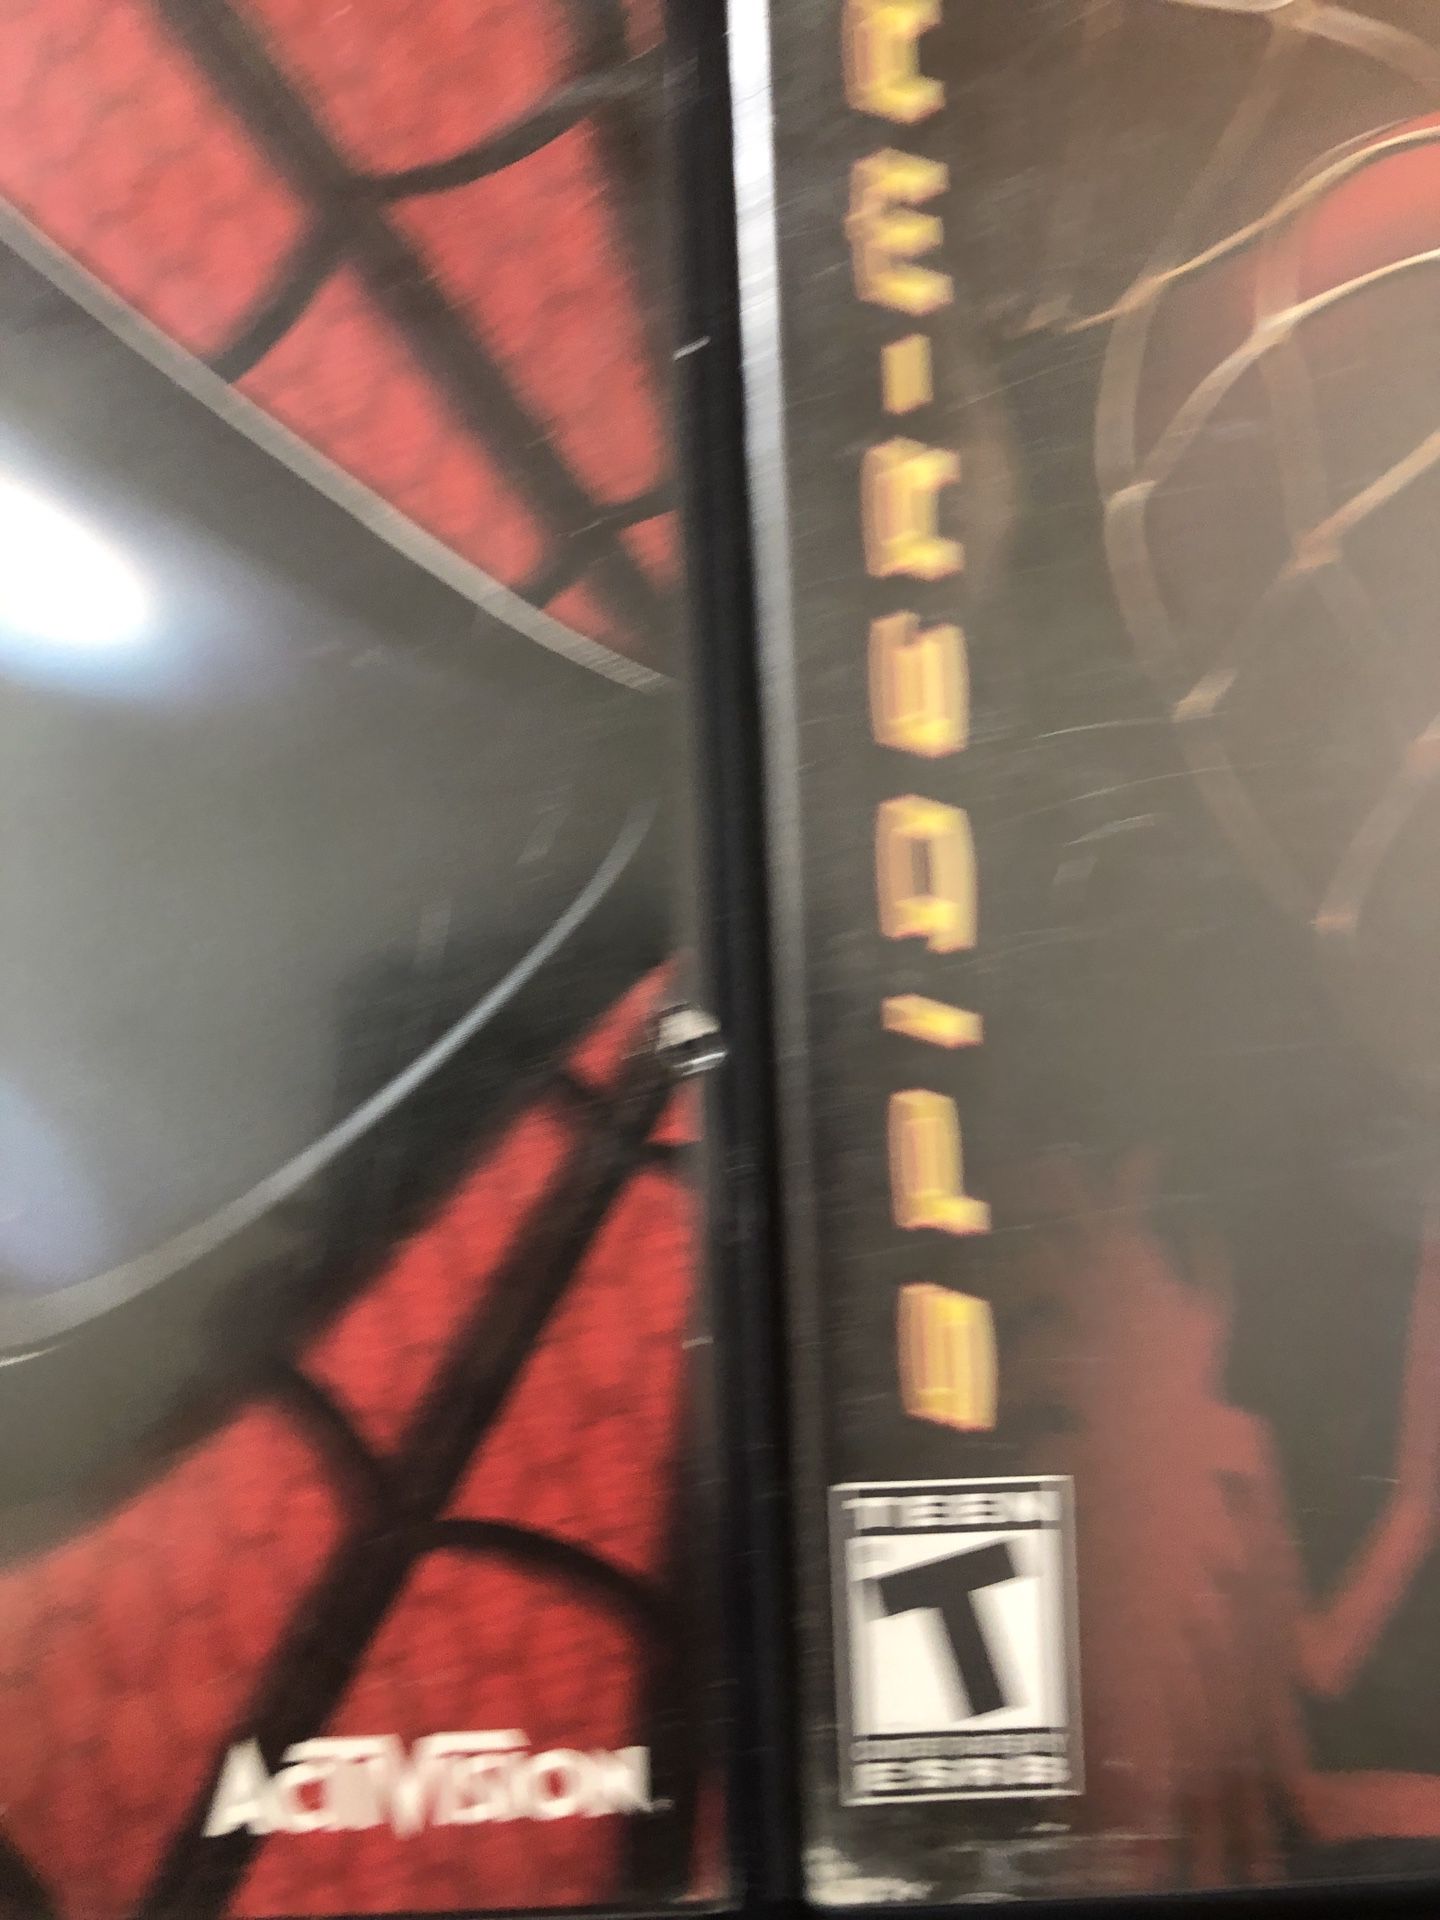 Ultimate Spiderman Limited Edition PS2 for Sale in Bell Gardens, CA -  OfferUp